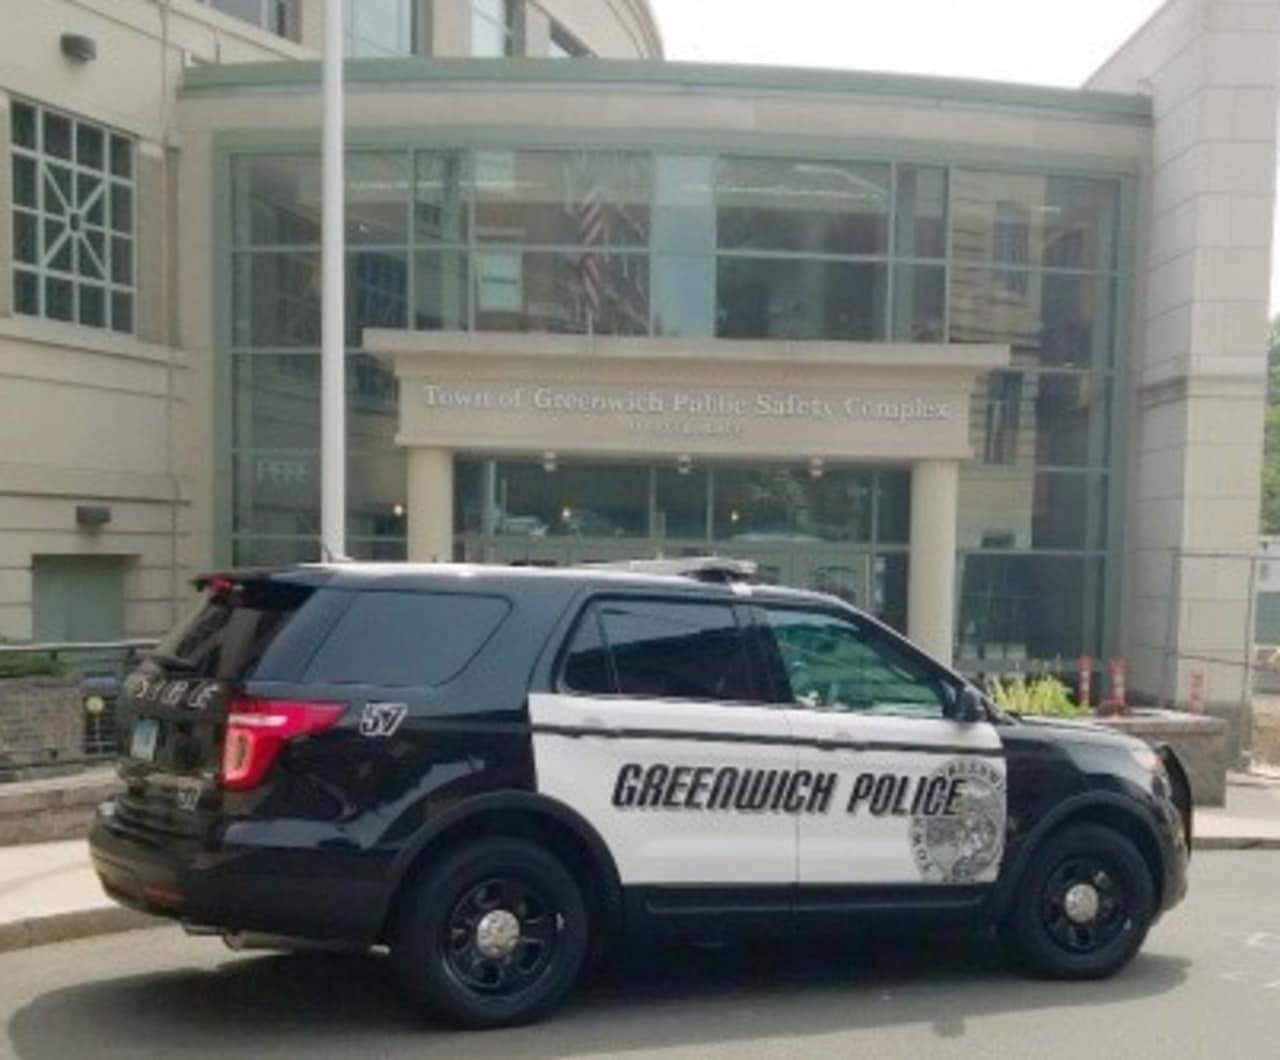 Greenwich police have charged John Navarra with assault and criminal mischief.